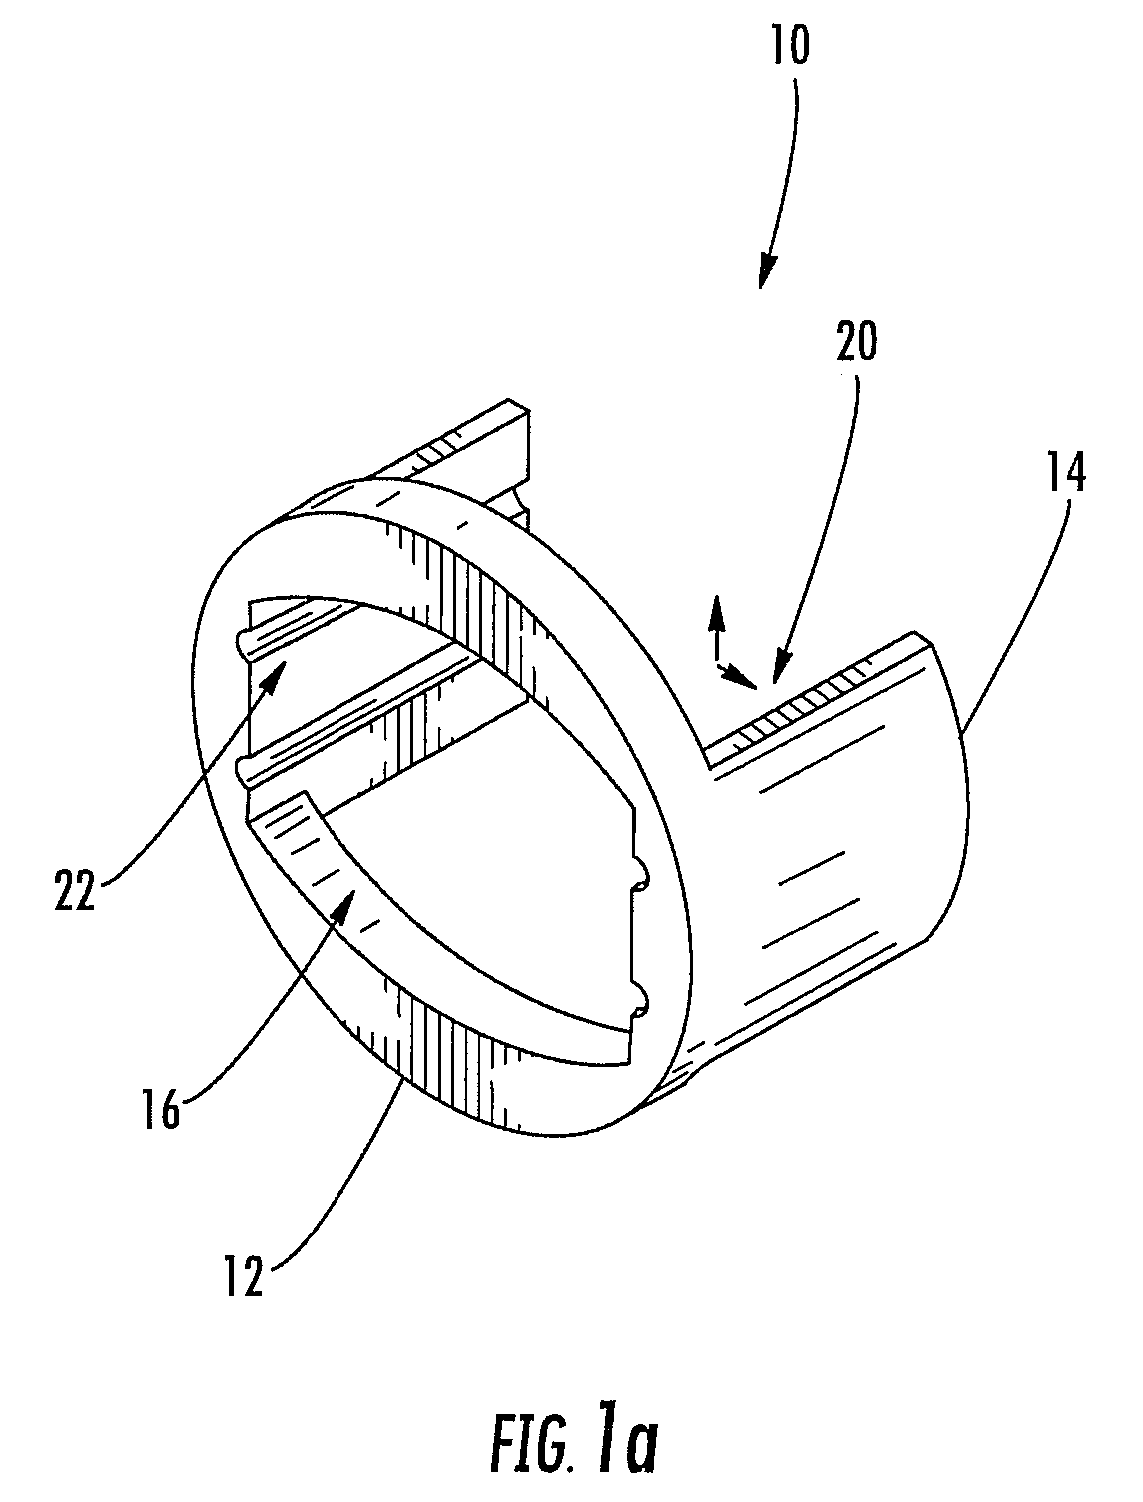 Anterior cervical spine instrumentation and related surgical method